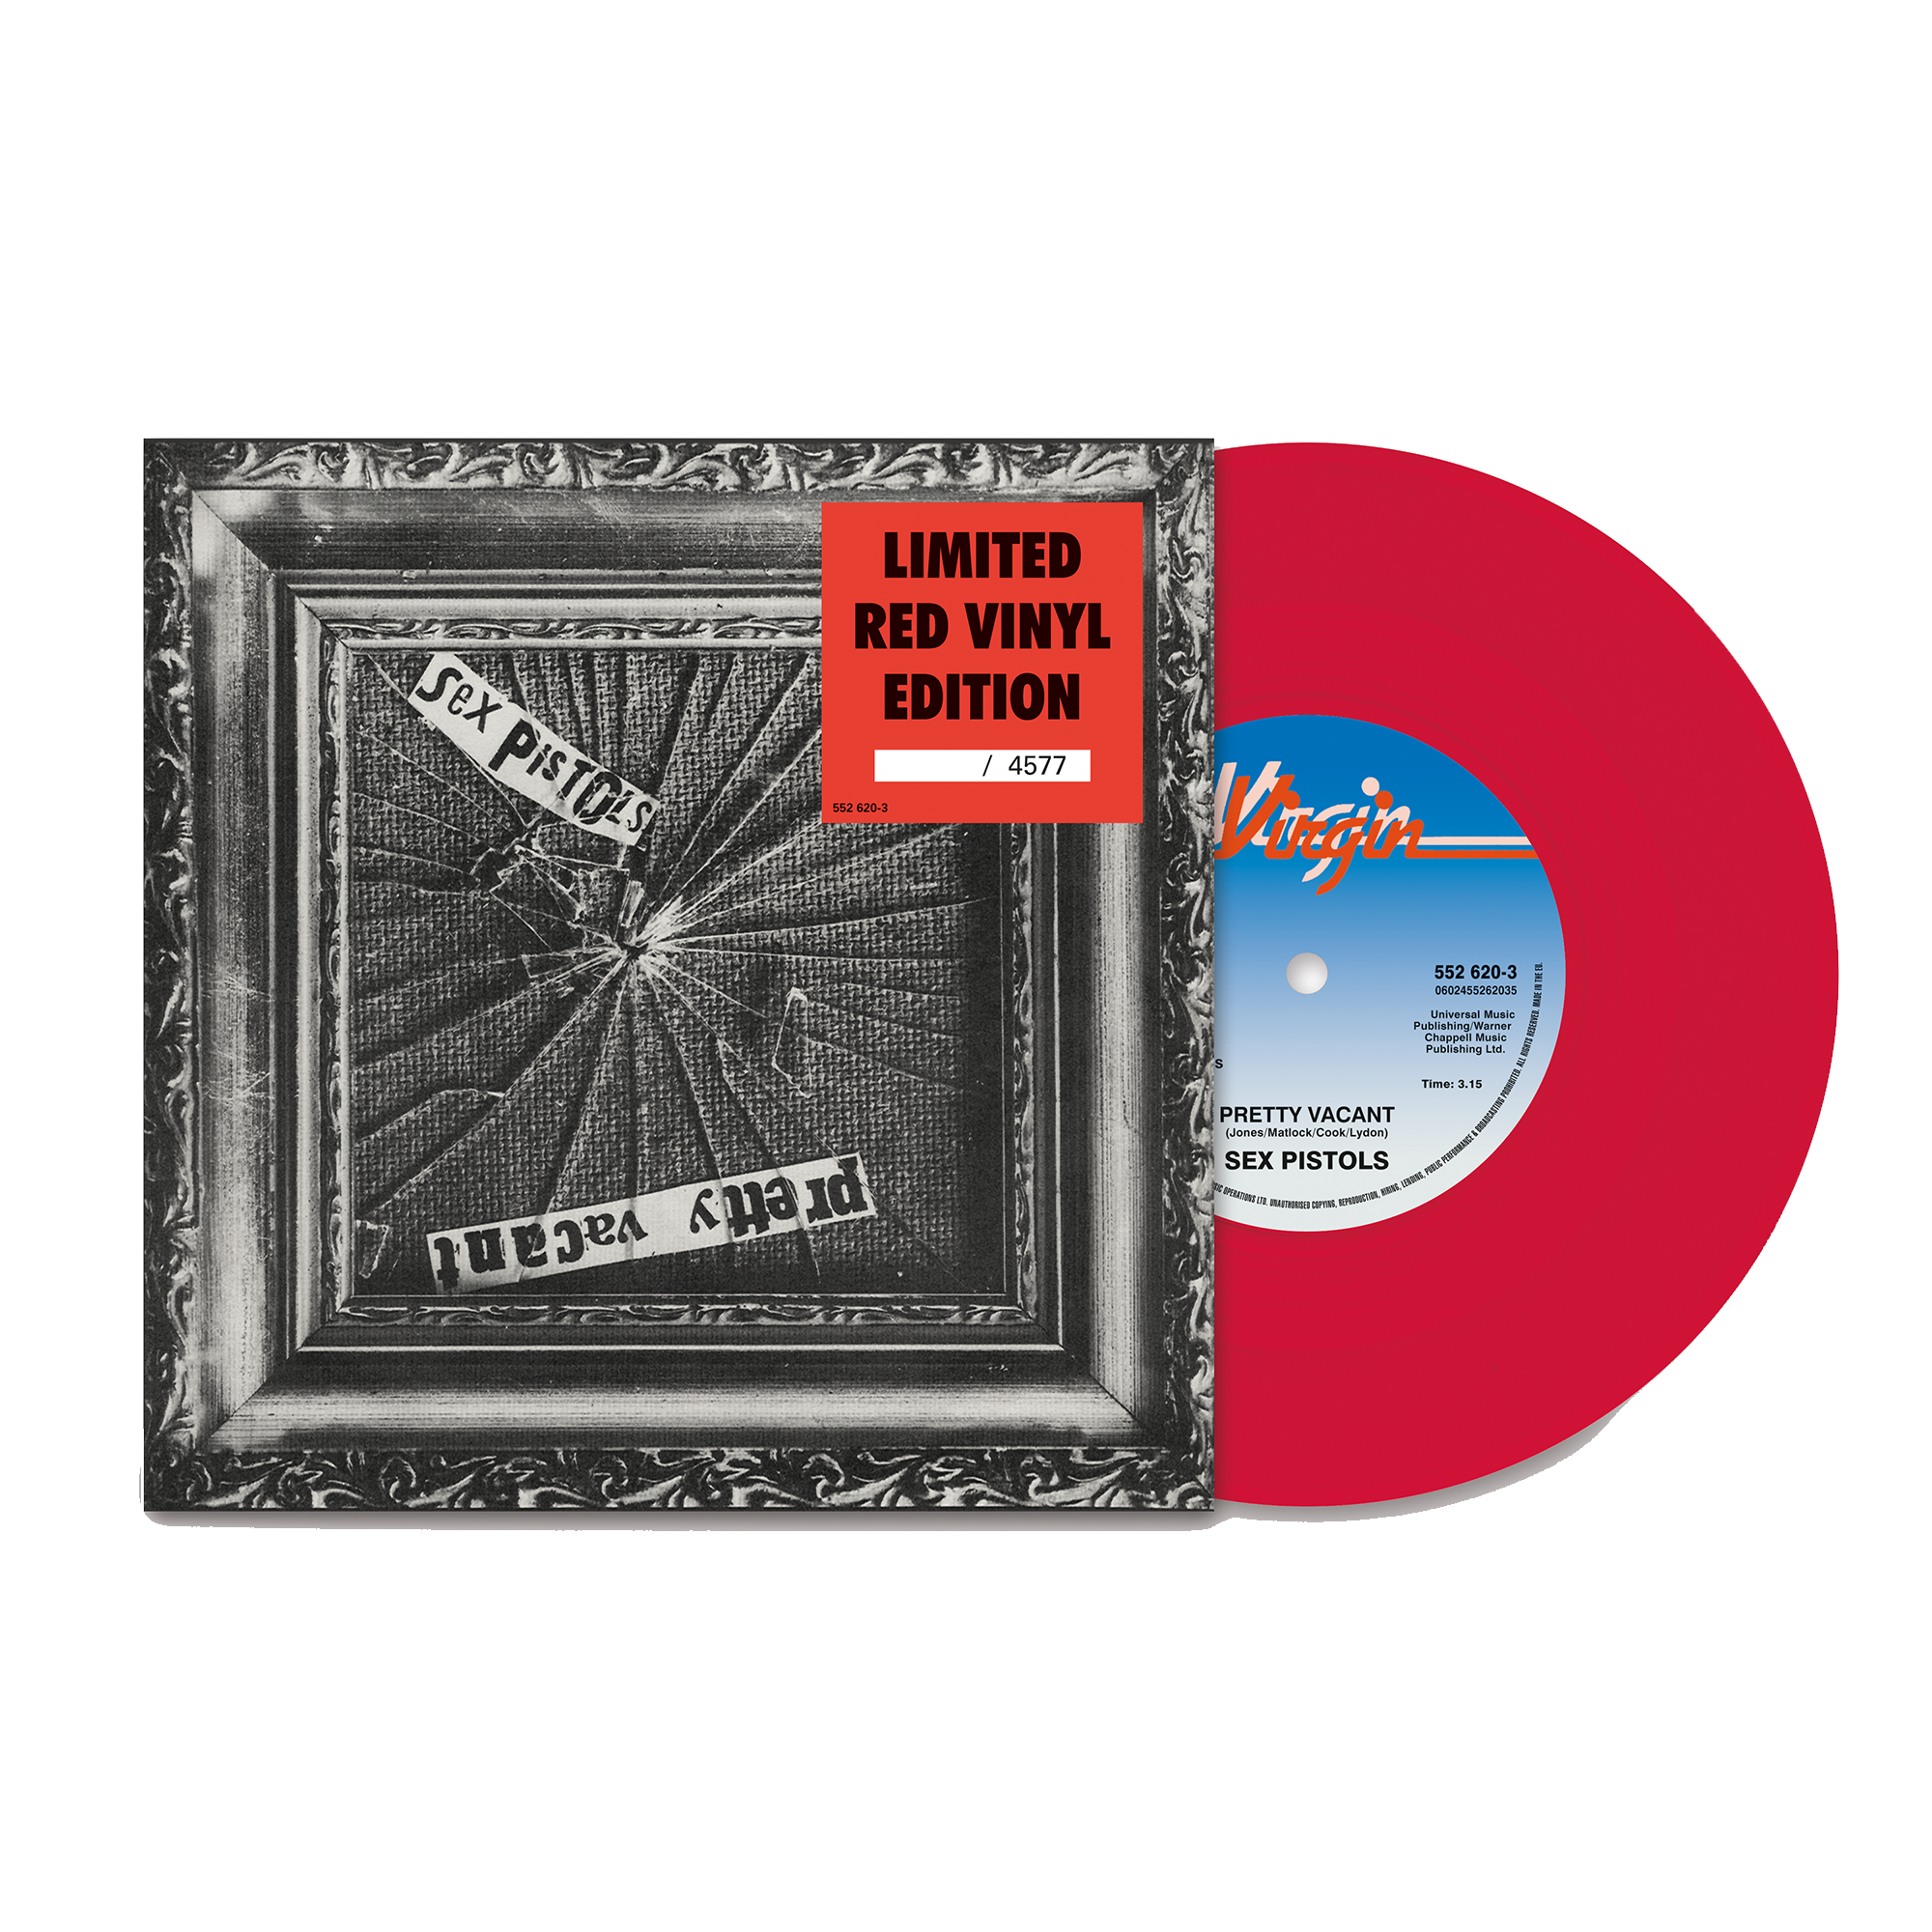 Pretty Vacant: Red Vinyl 7" Single + Pretty Vacant Don’t Care T-Shirt + Pretty Vacant Poster